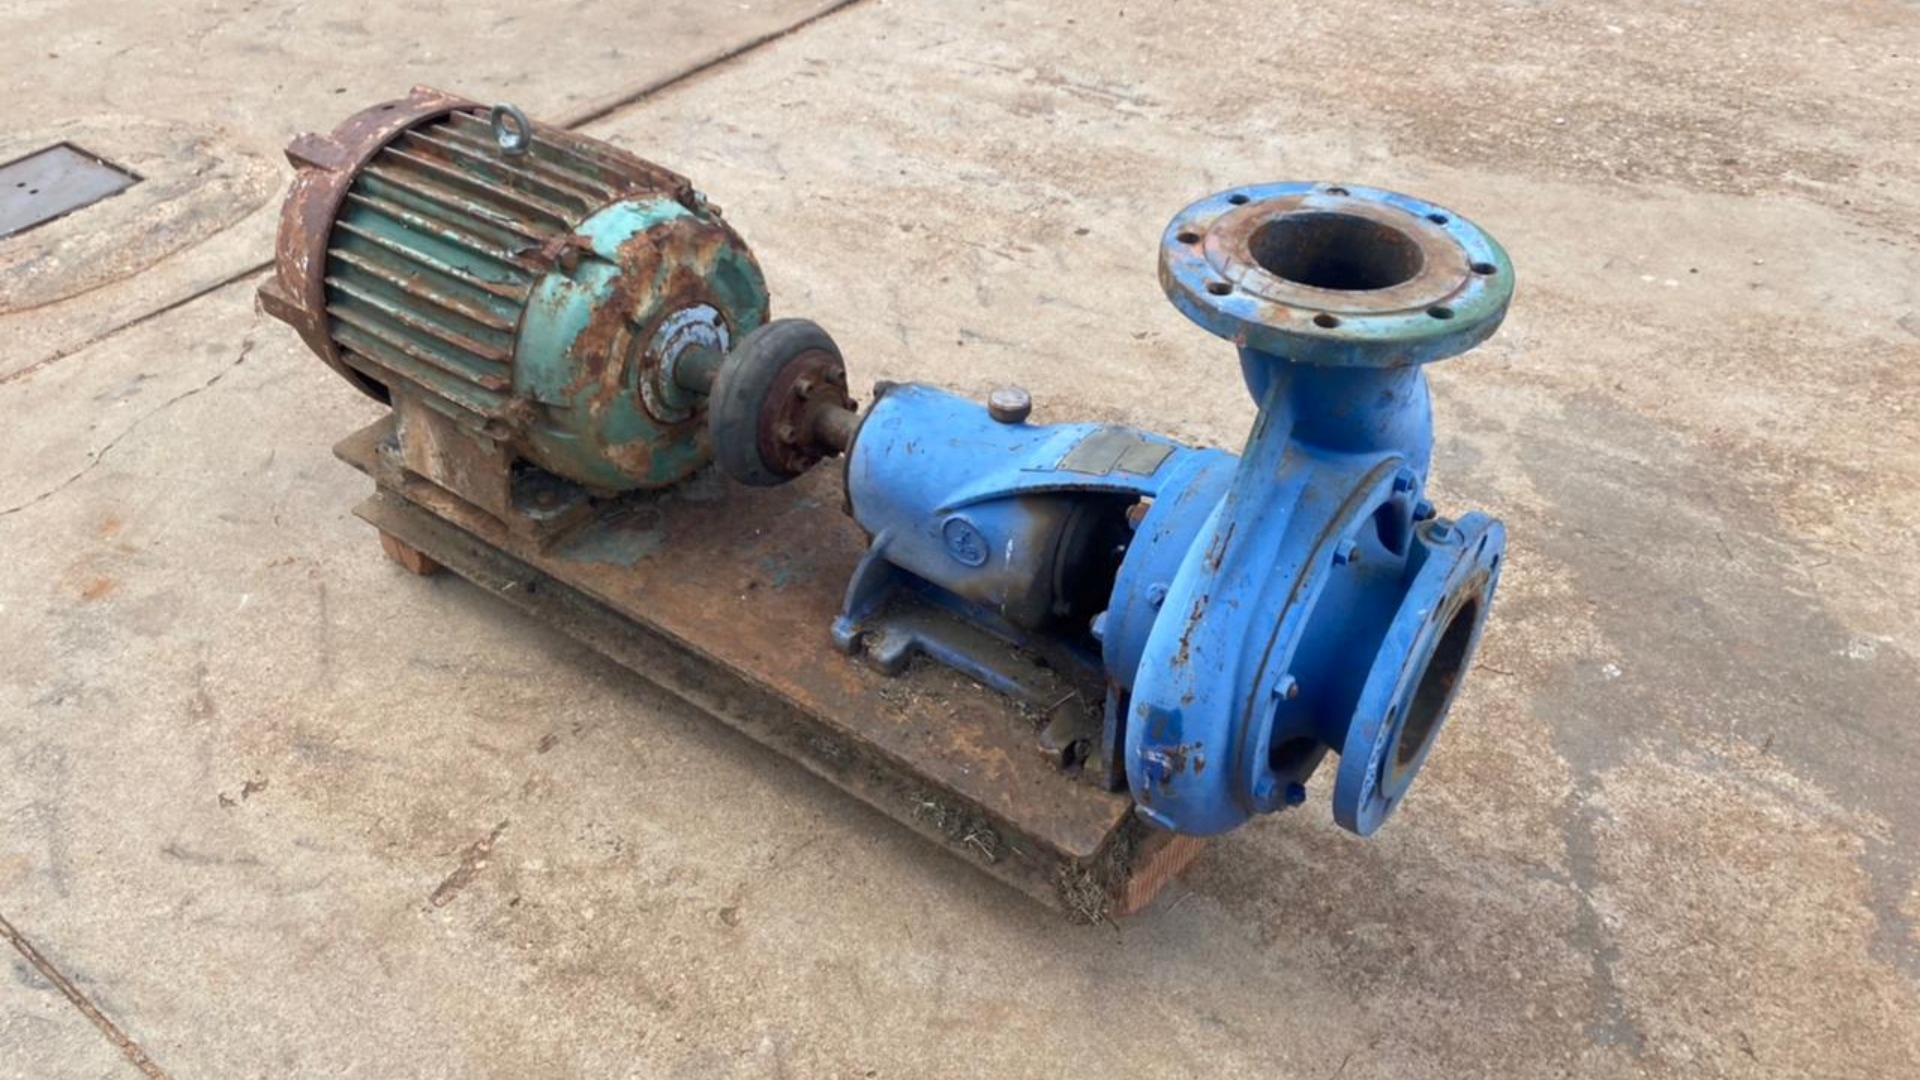 Irrigation Irrigation pumps KSB Waterpump with Motor for sale by Dirtworx | AgriMag Marketplace